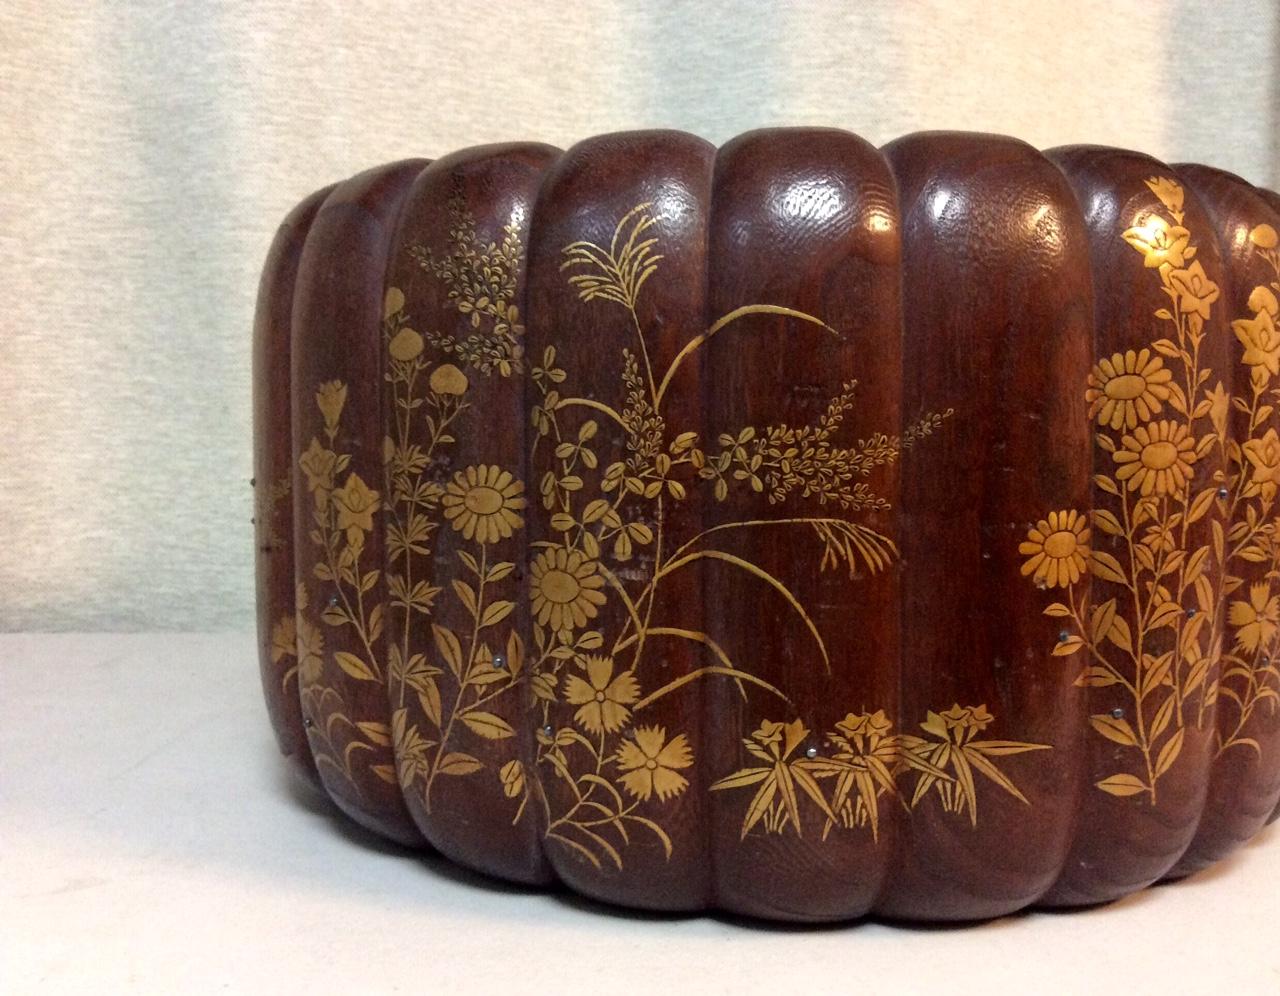 The wonderful hibachi is hand carved with ribs and hand-decorated in low-relief with Makie lacquer and silver dots. It depicts a floral motif of chrysanthemum, lilies and seasonal flower blooms set amongst lush foliage and tall Pampas grass. 
The